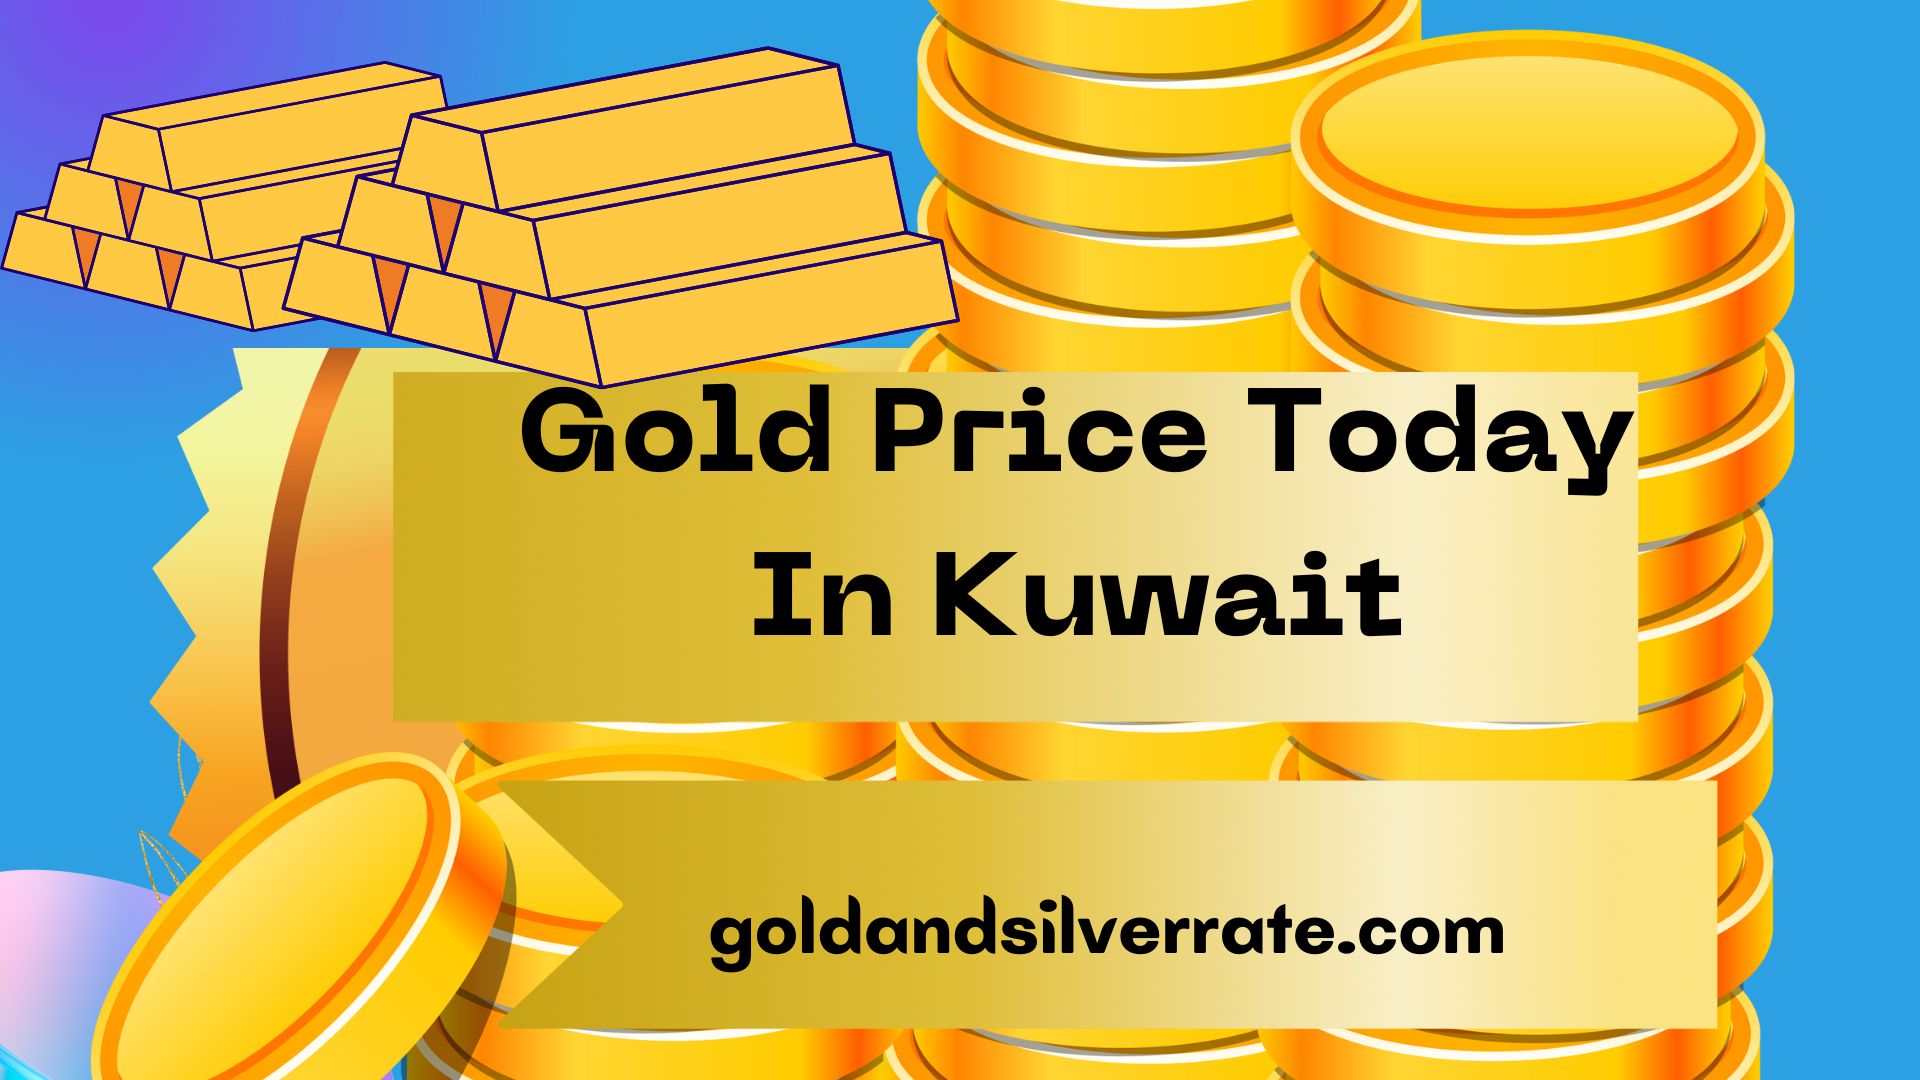 Gold Price Today In Kuwait